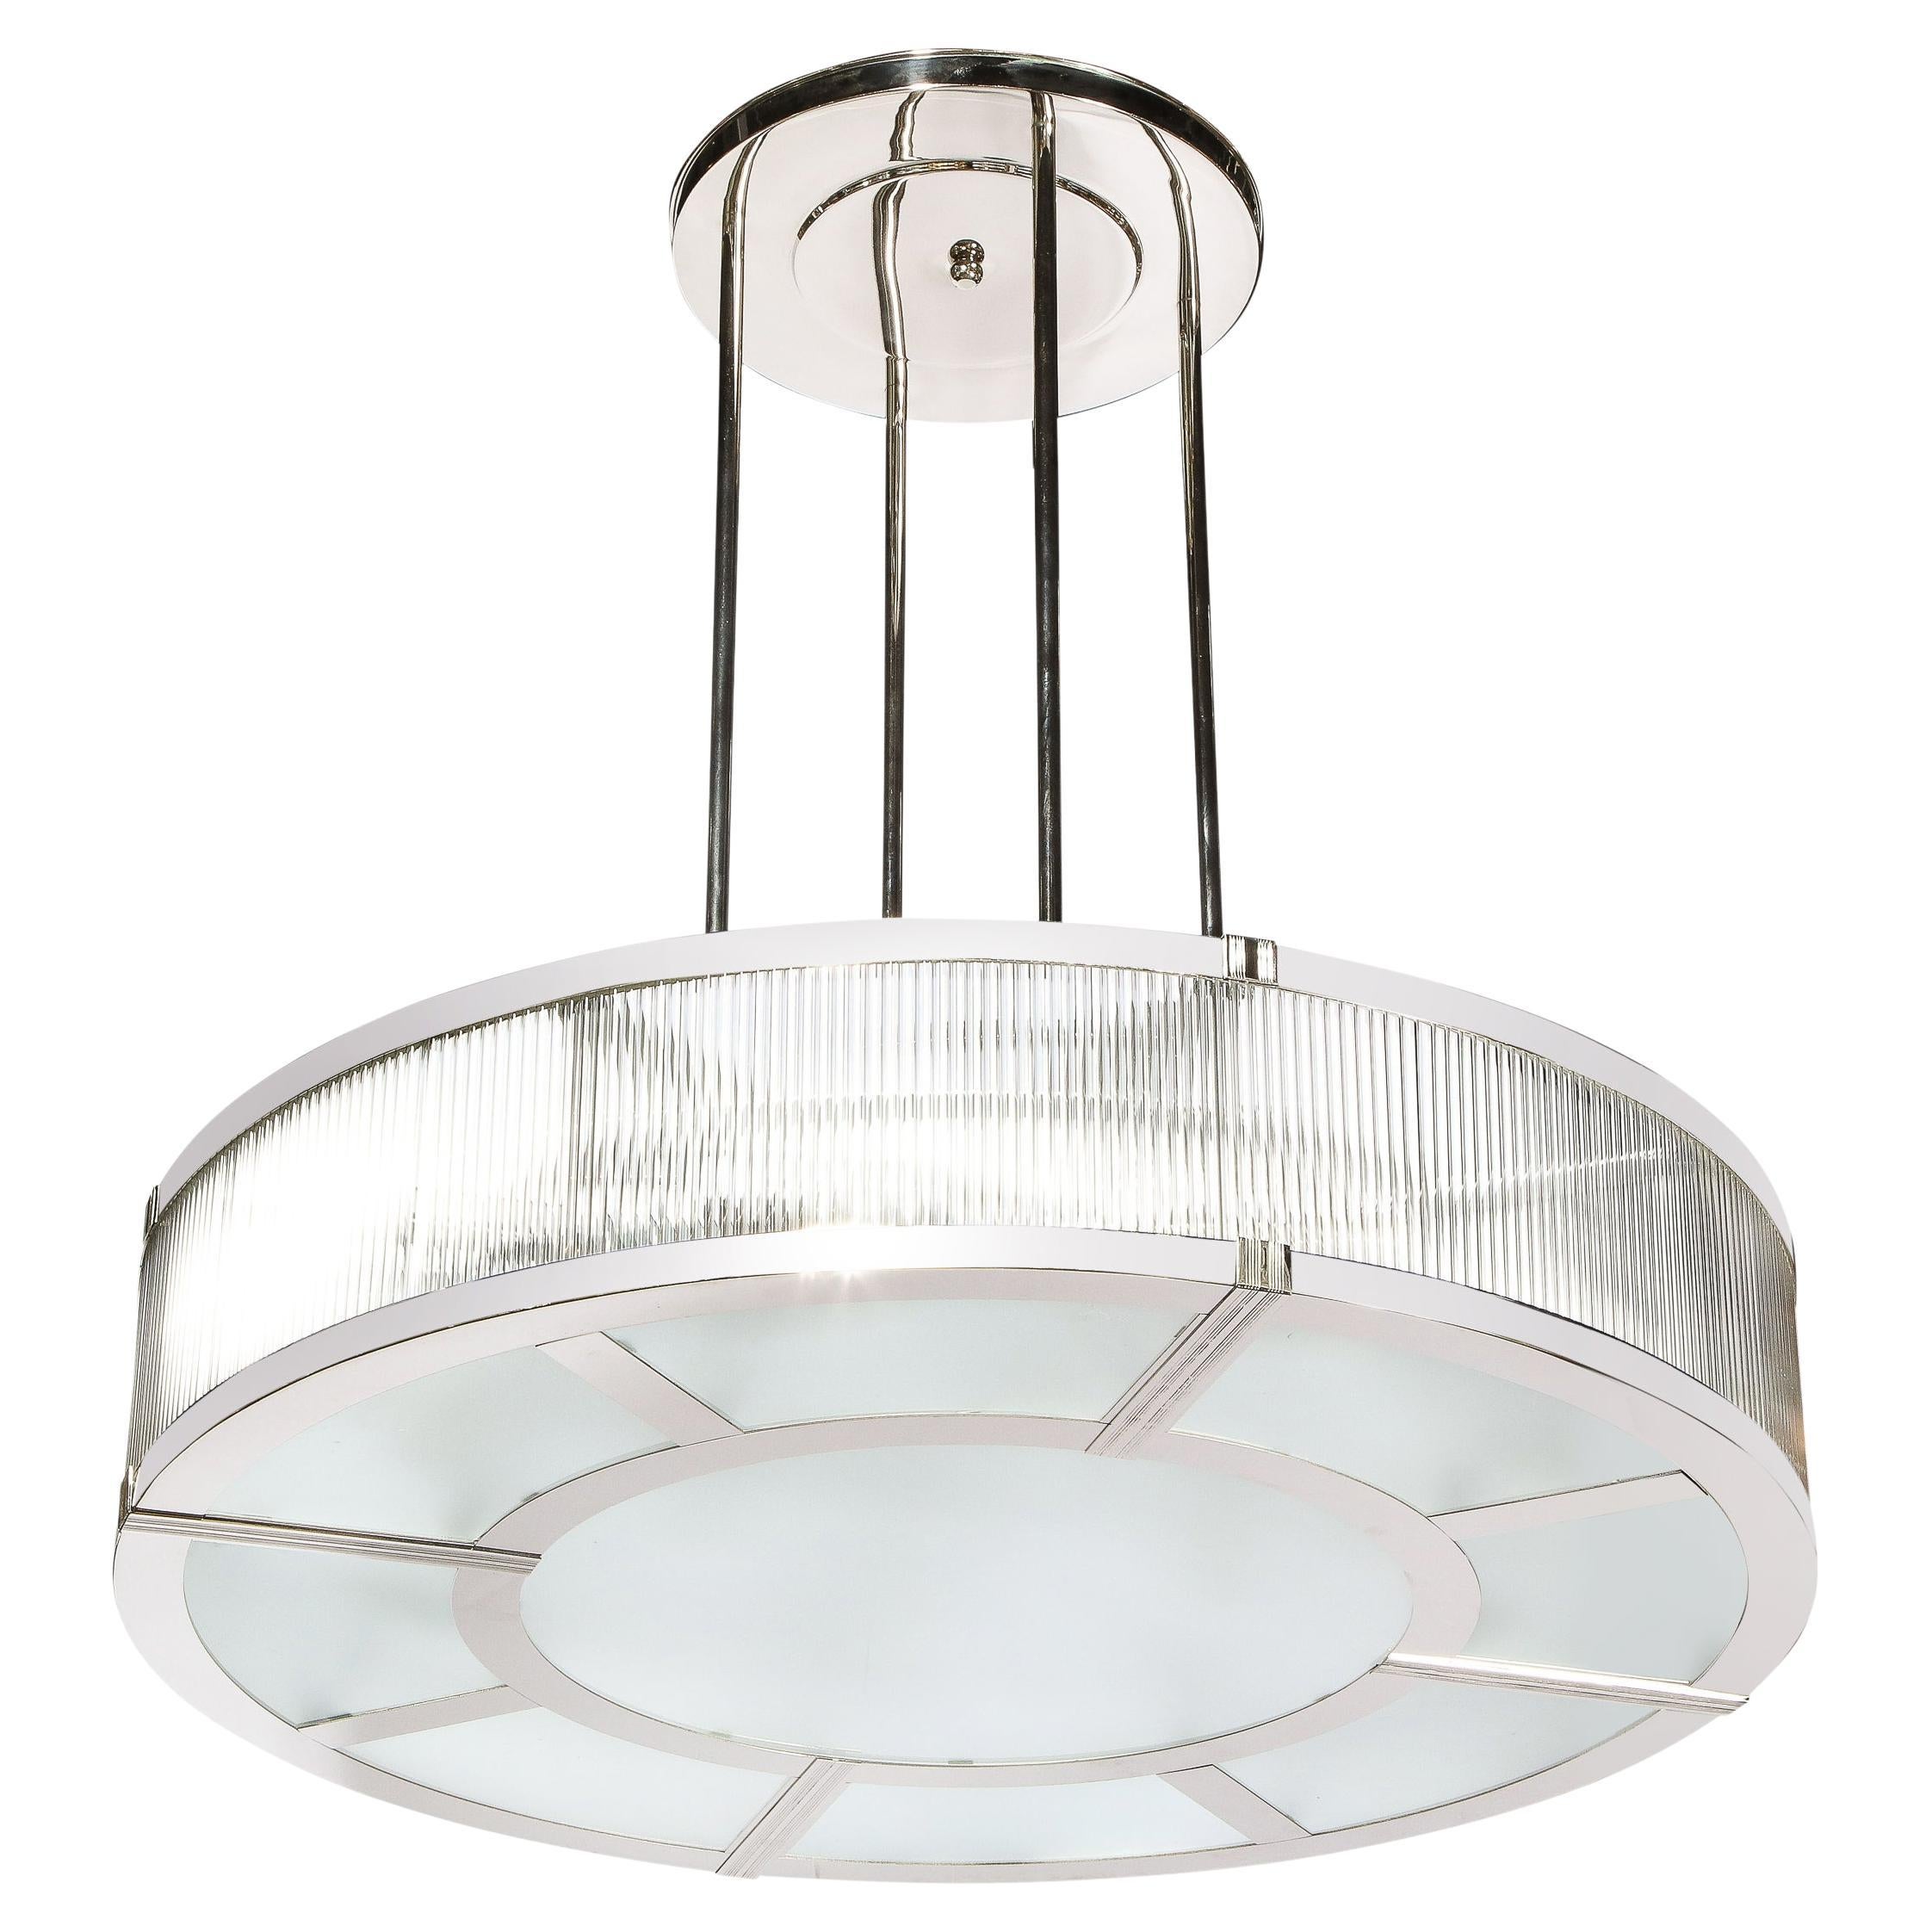 Streamlined Art Deco Revival Circular Chandelier in Polished Nickel & Glass